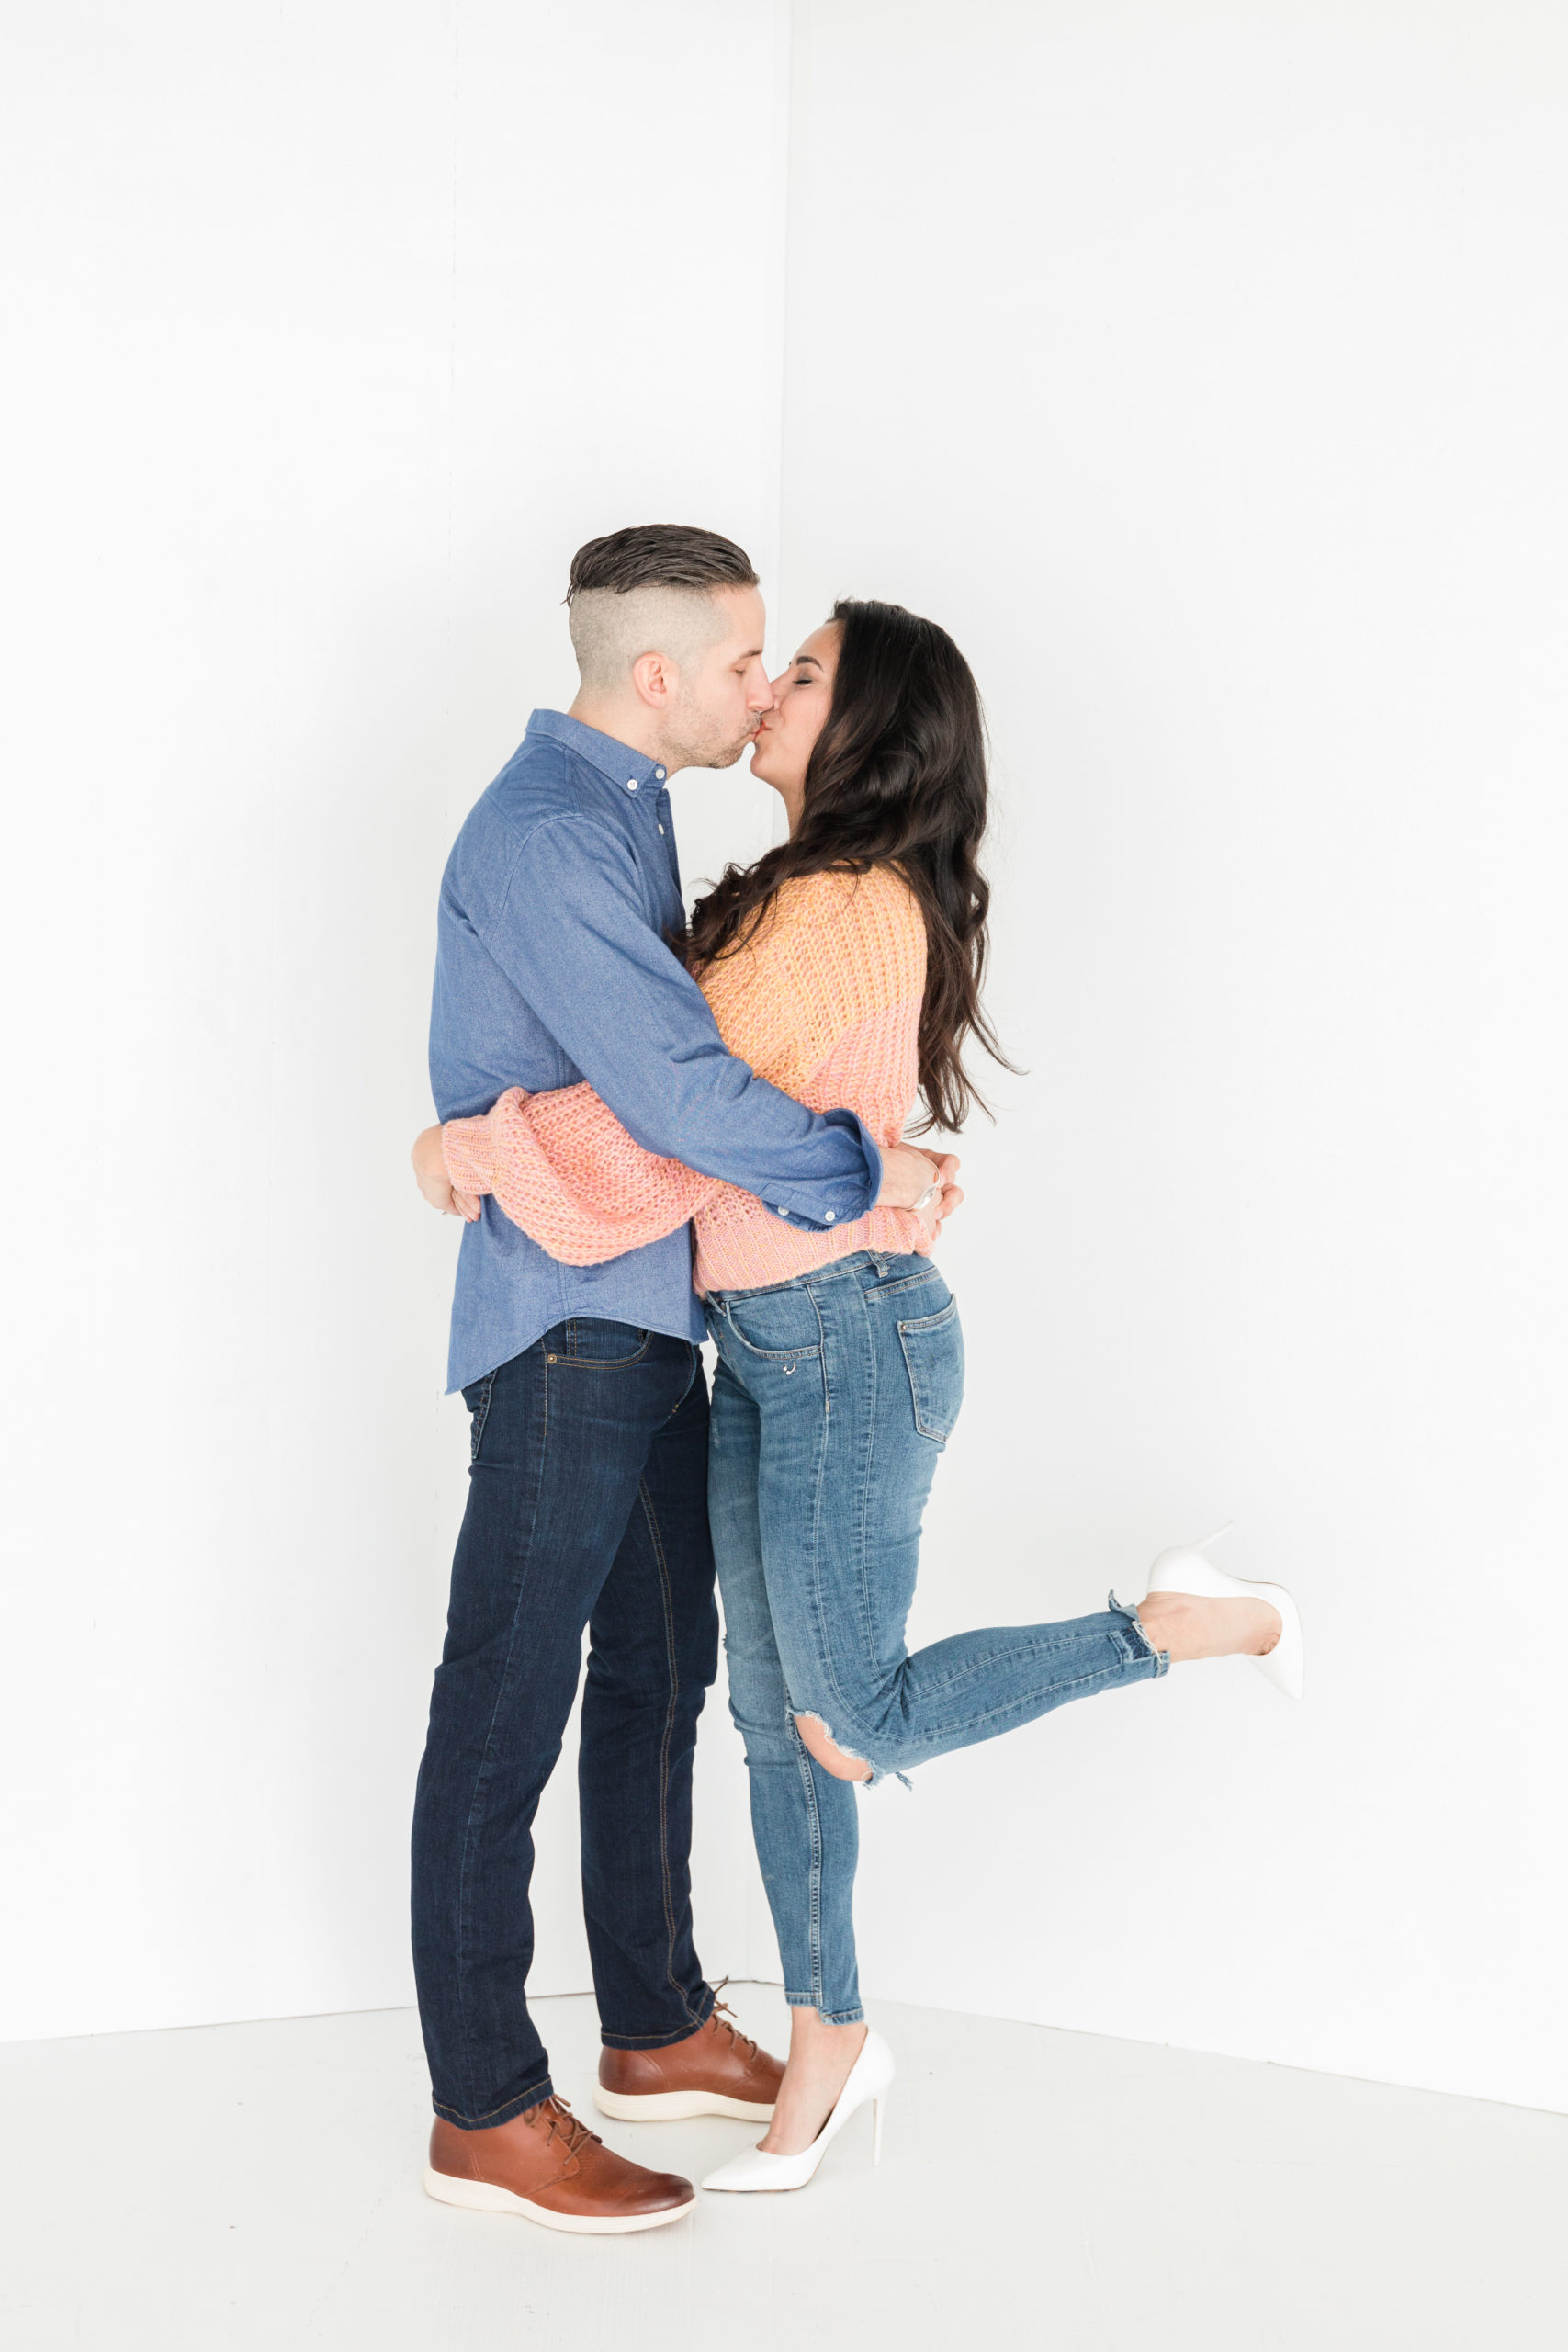 22 date night challenge, couples synergy photo session, Couple session, husband and wife session, love session, Studio Session, Postponing, Coronavirus, COVID-19